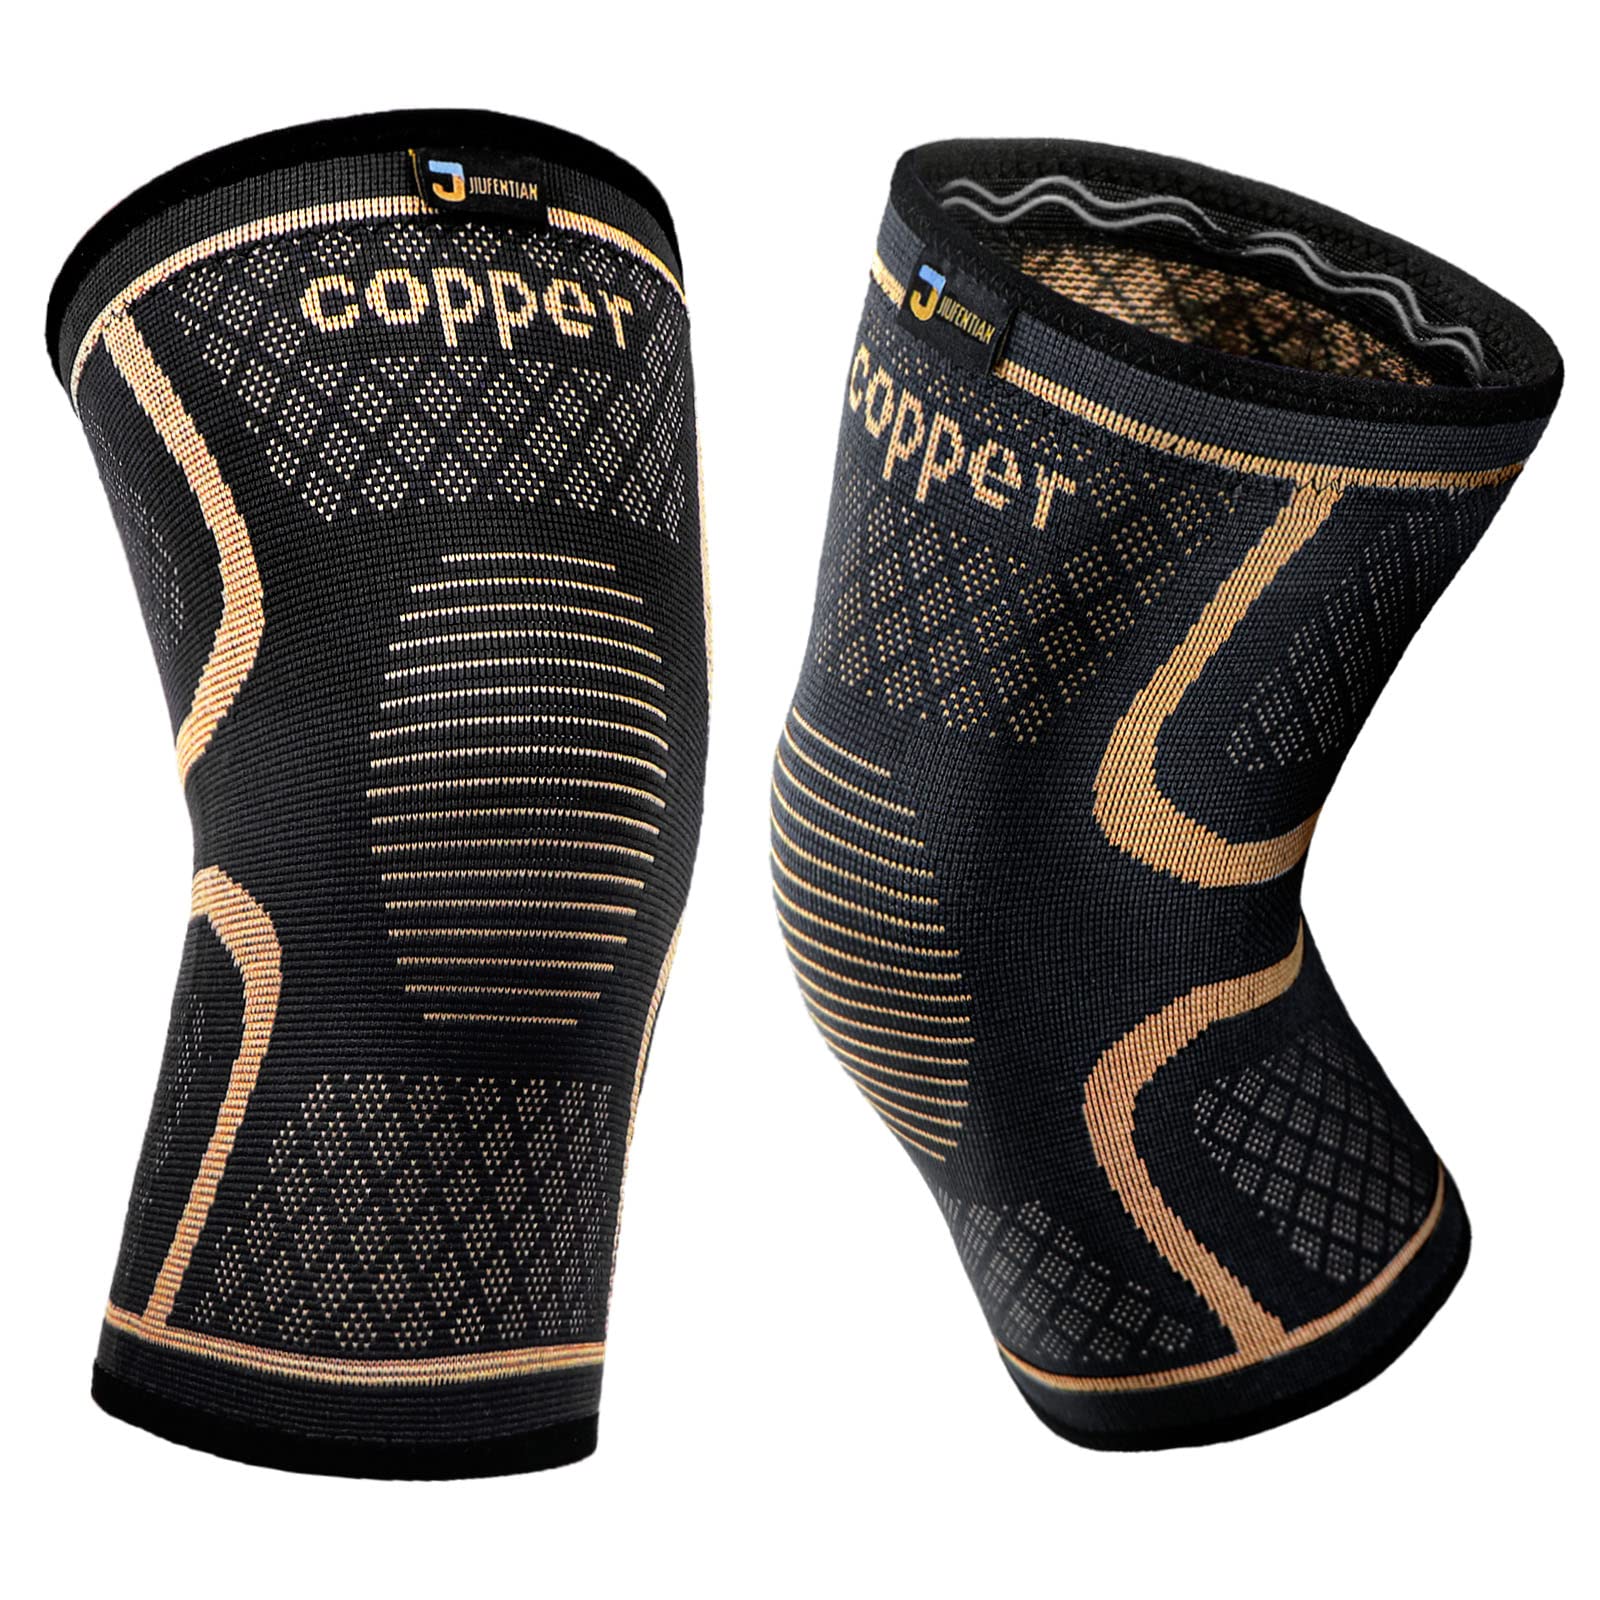 Copper Knee Braces for Men and Women (2 pack) -Knee Supports